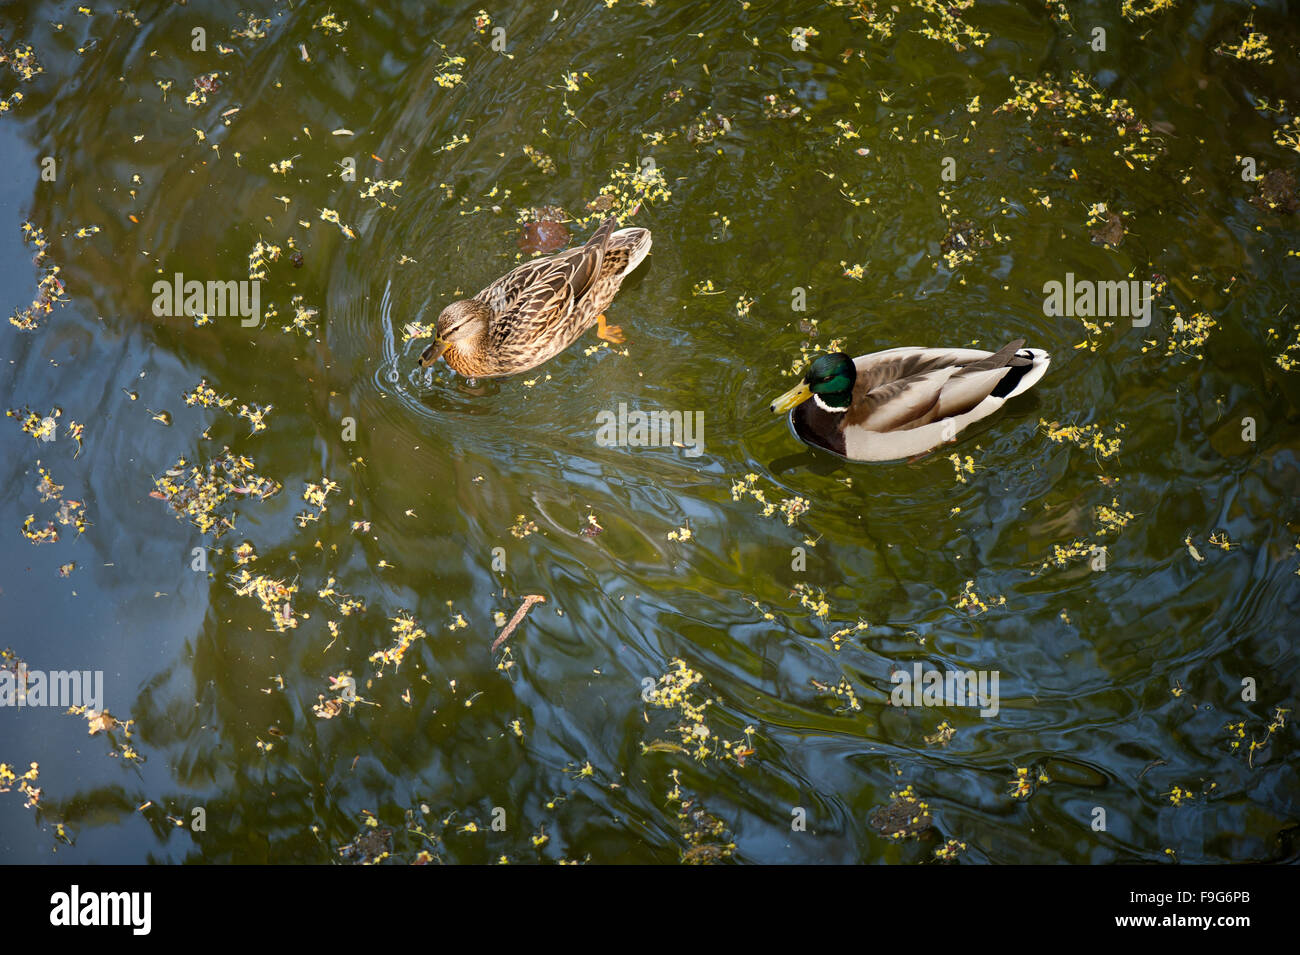 Ducks swimming on the pond in water reflections abstract, reflection on the wavy water surface and two wild duck birds floating Stock Photo